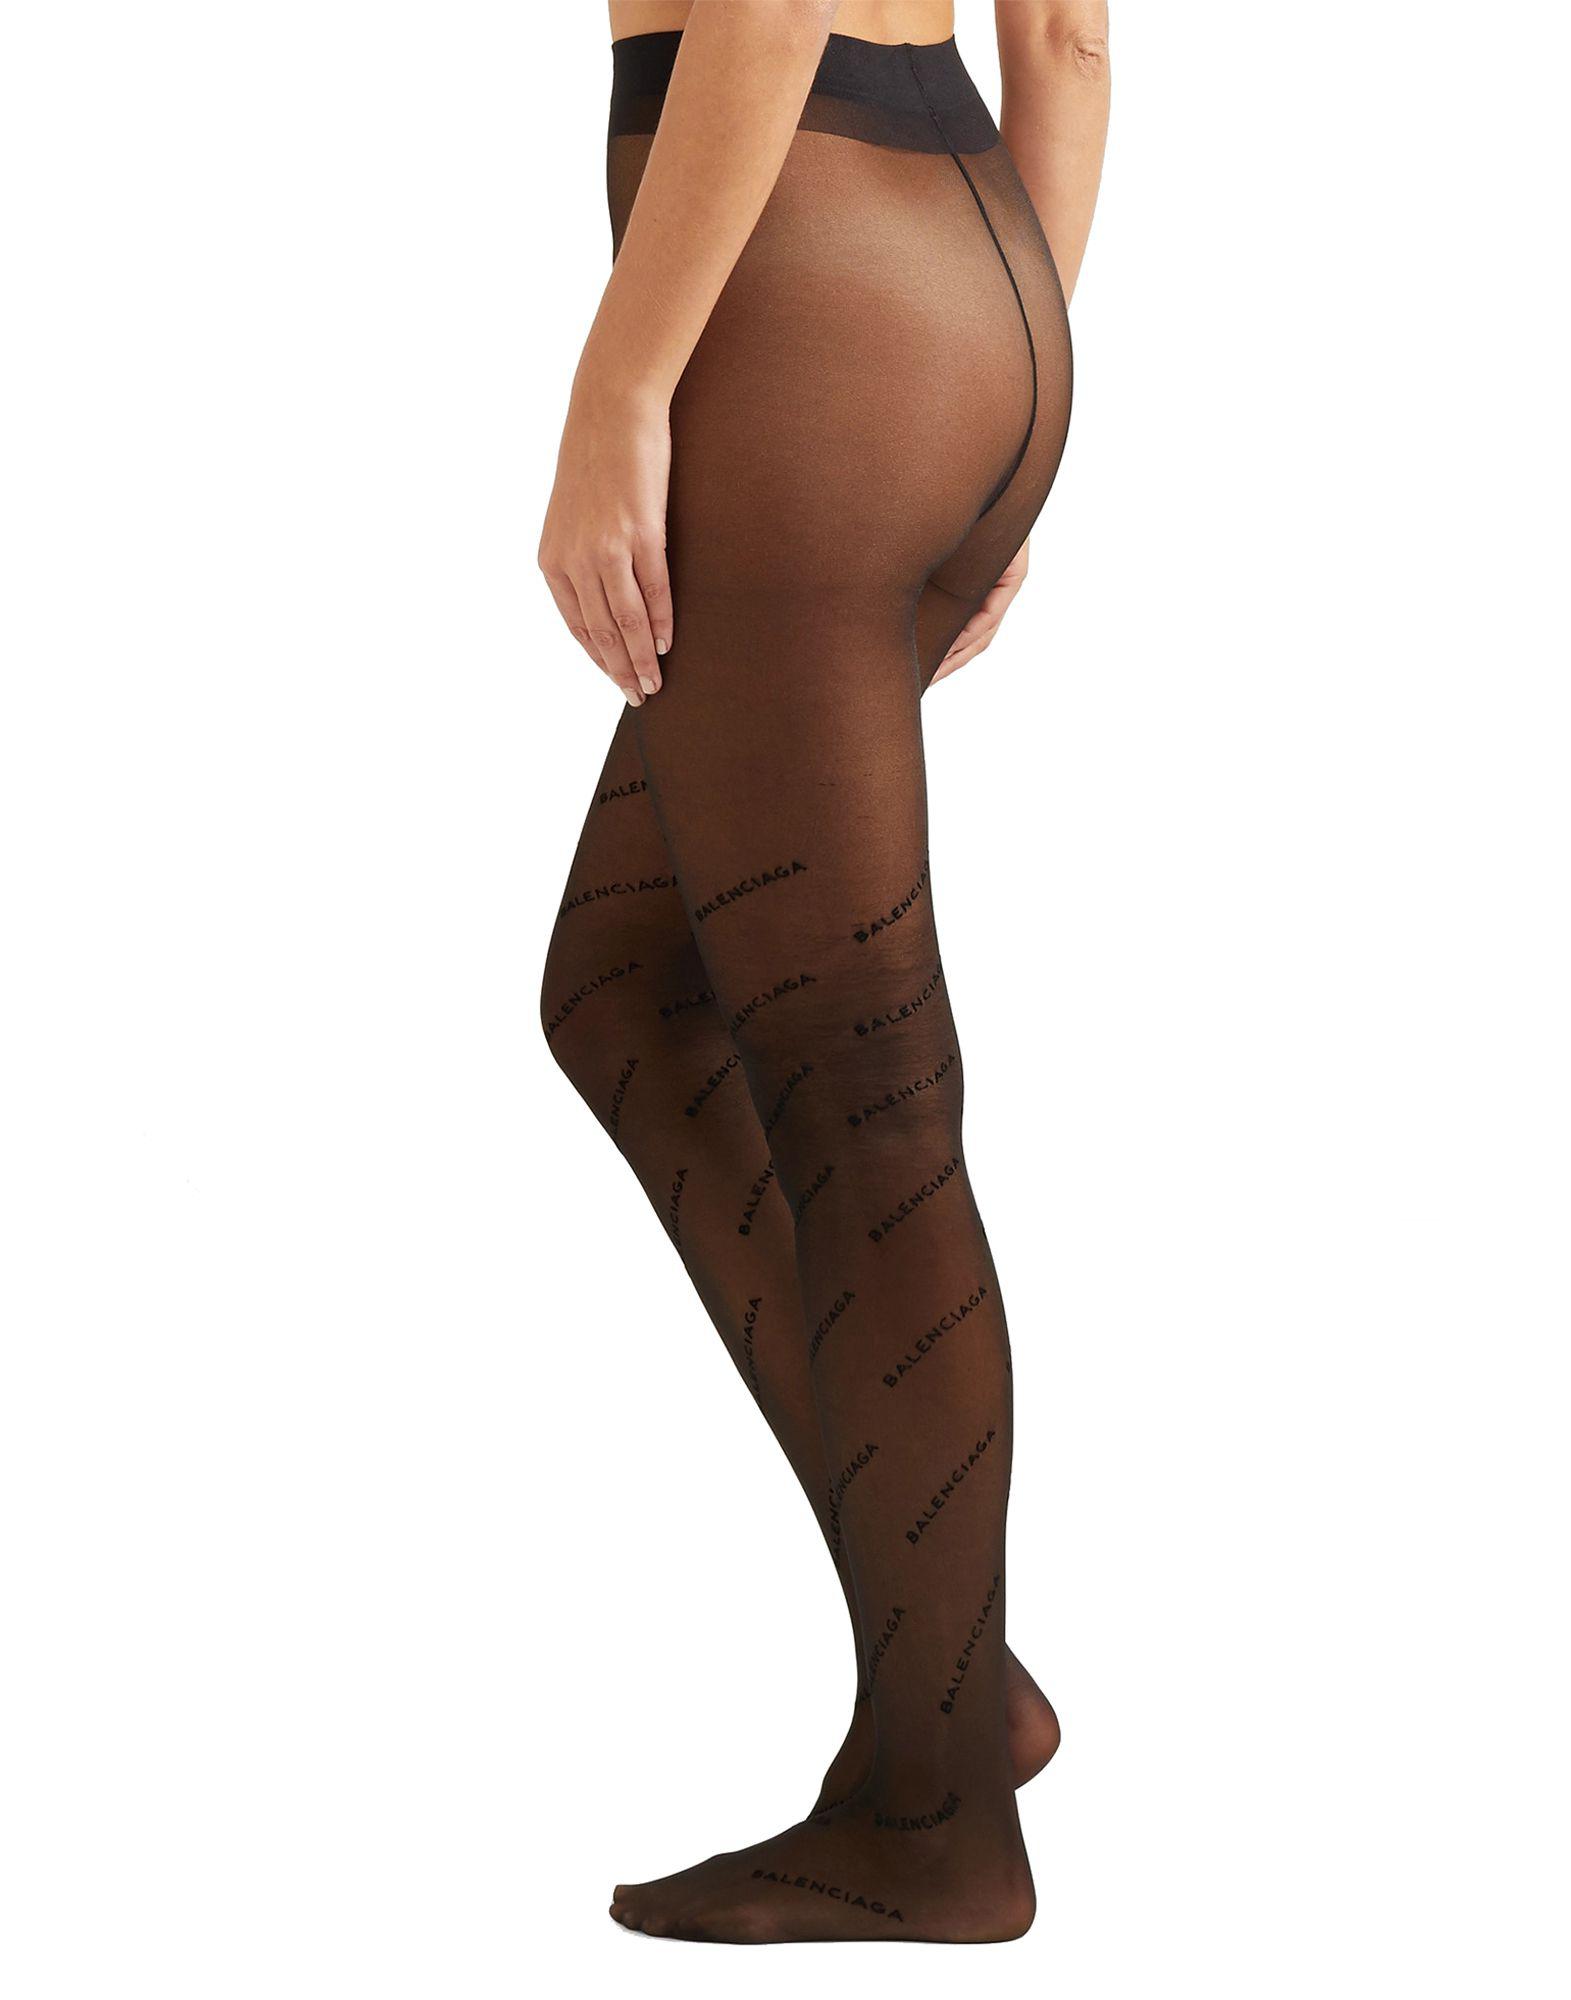 In a tight spot? Here's the latest on hosiery